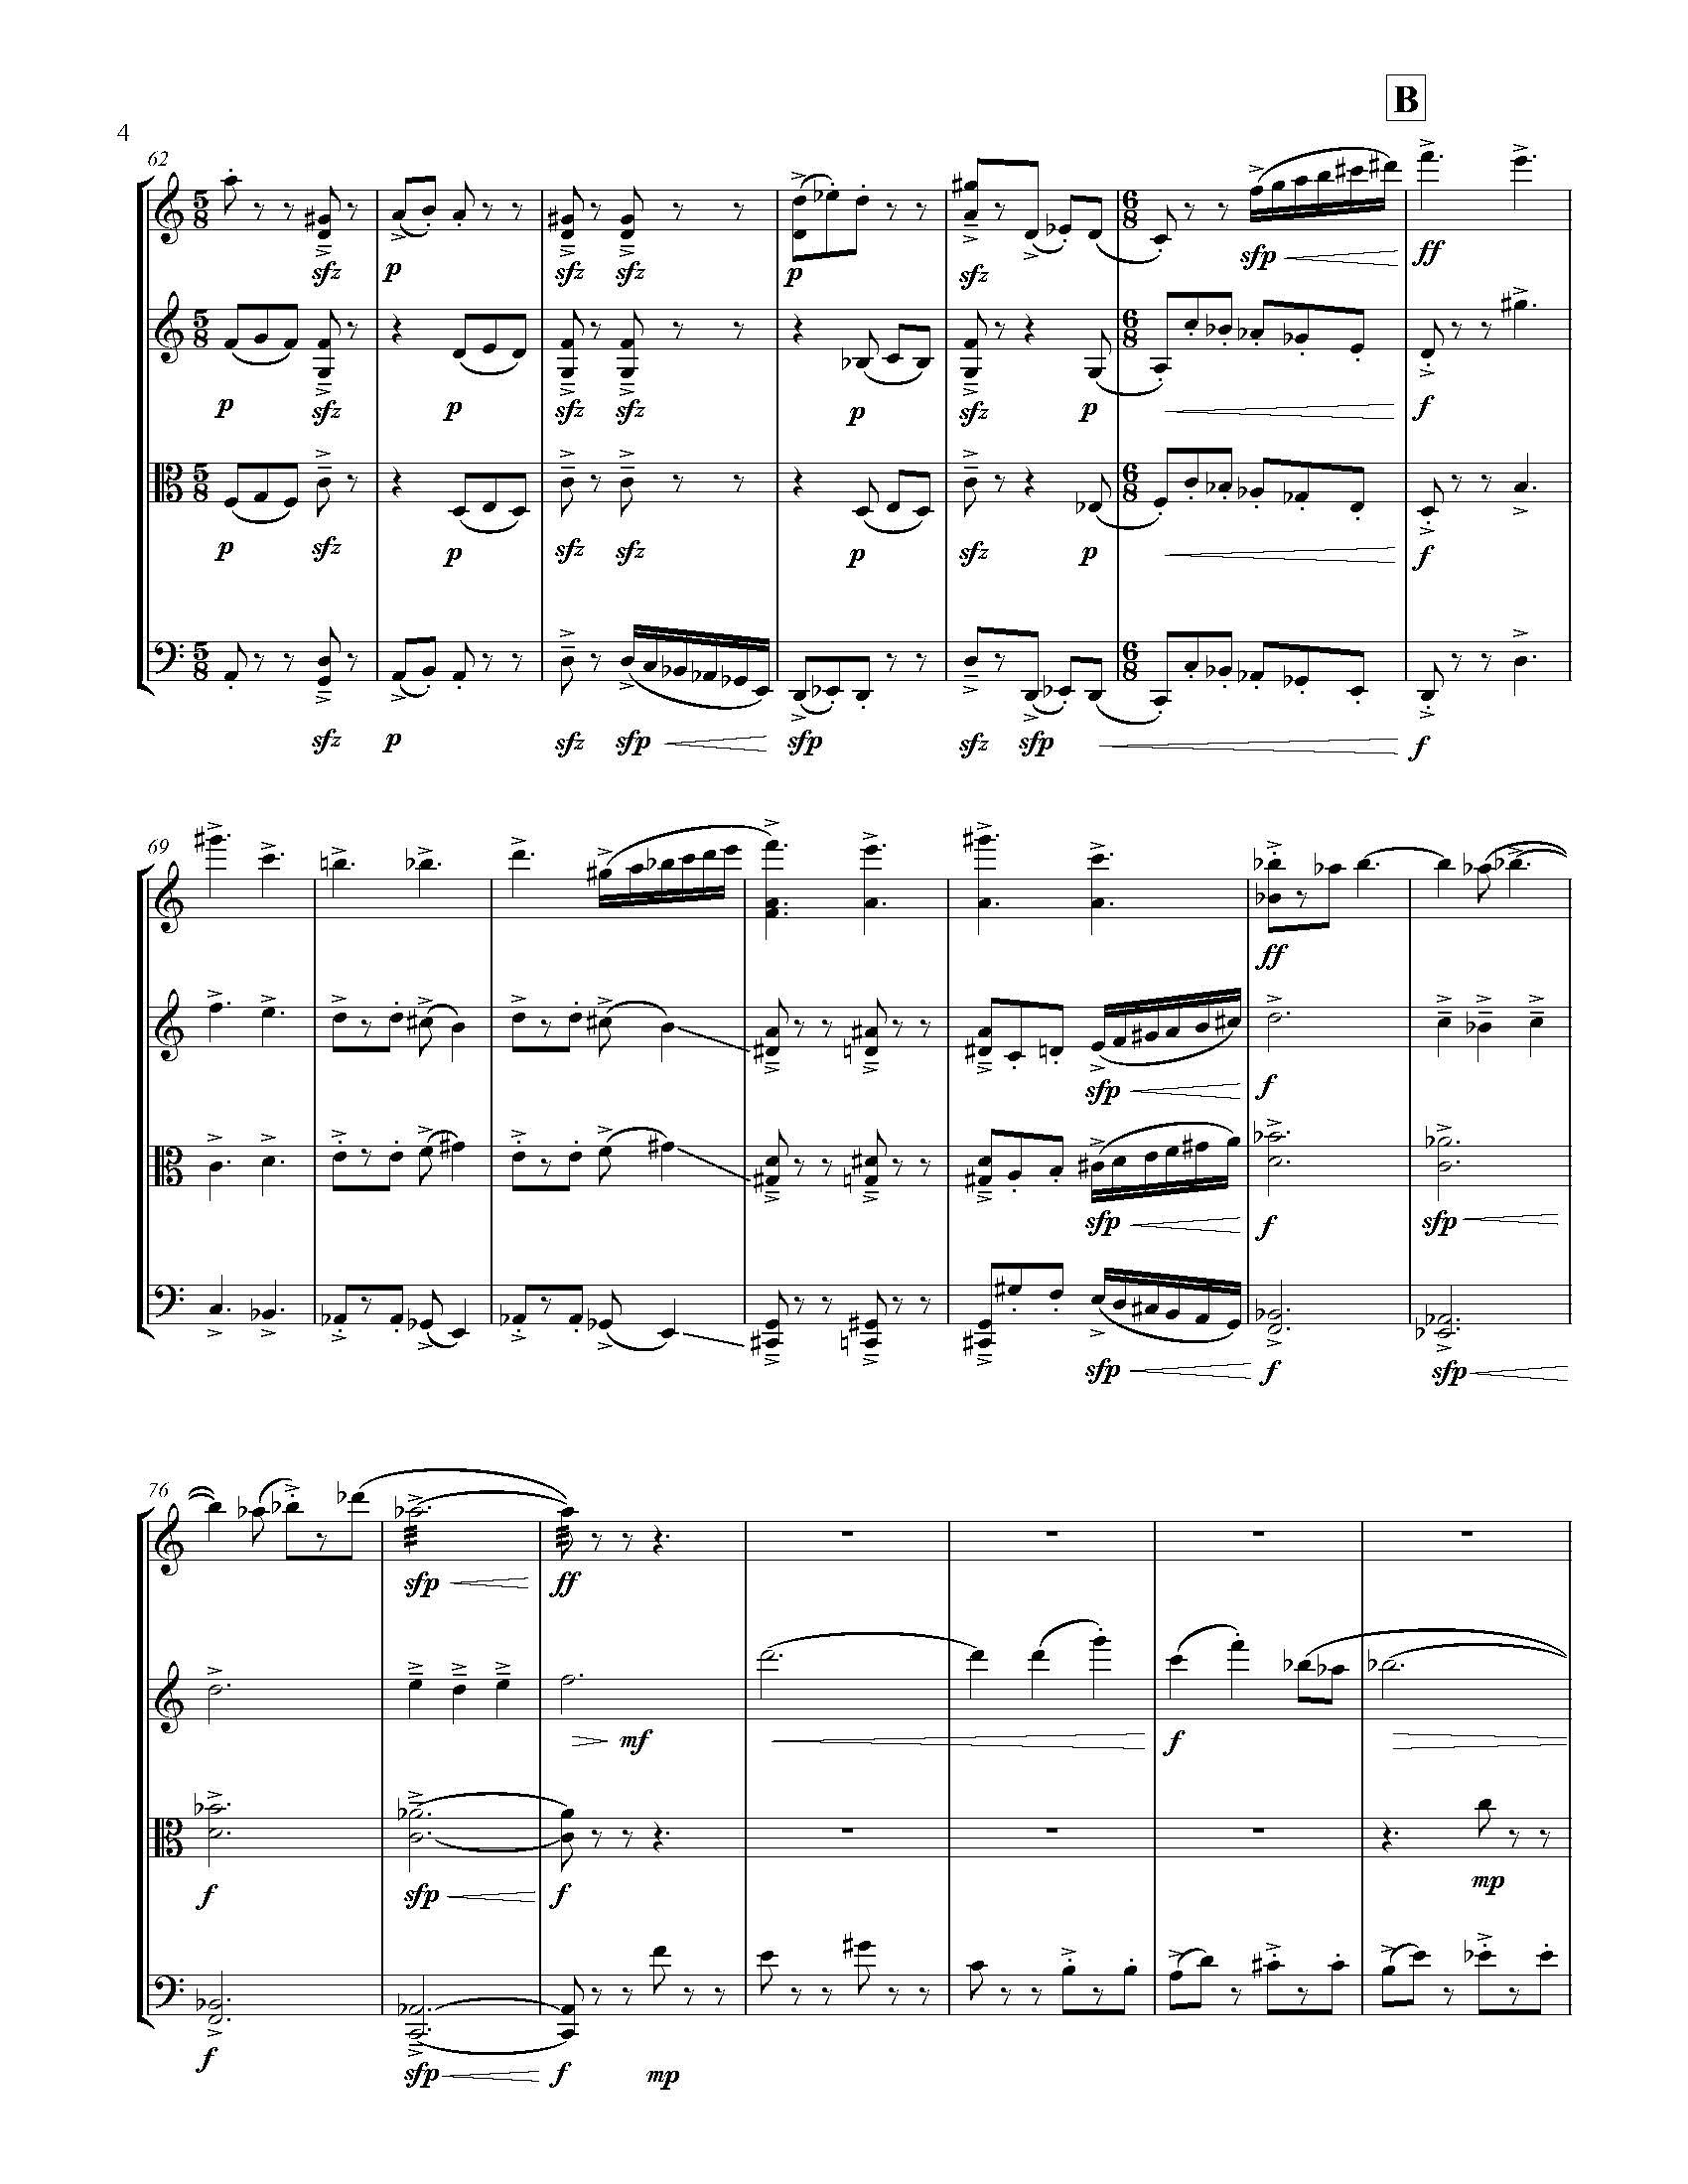 A Country of Vast Designs - Complete Score_Page_10.jpg